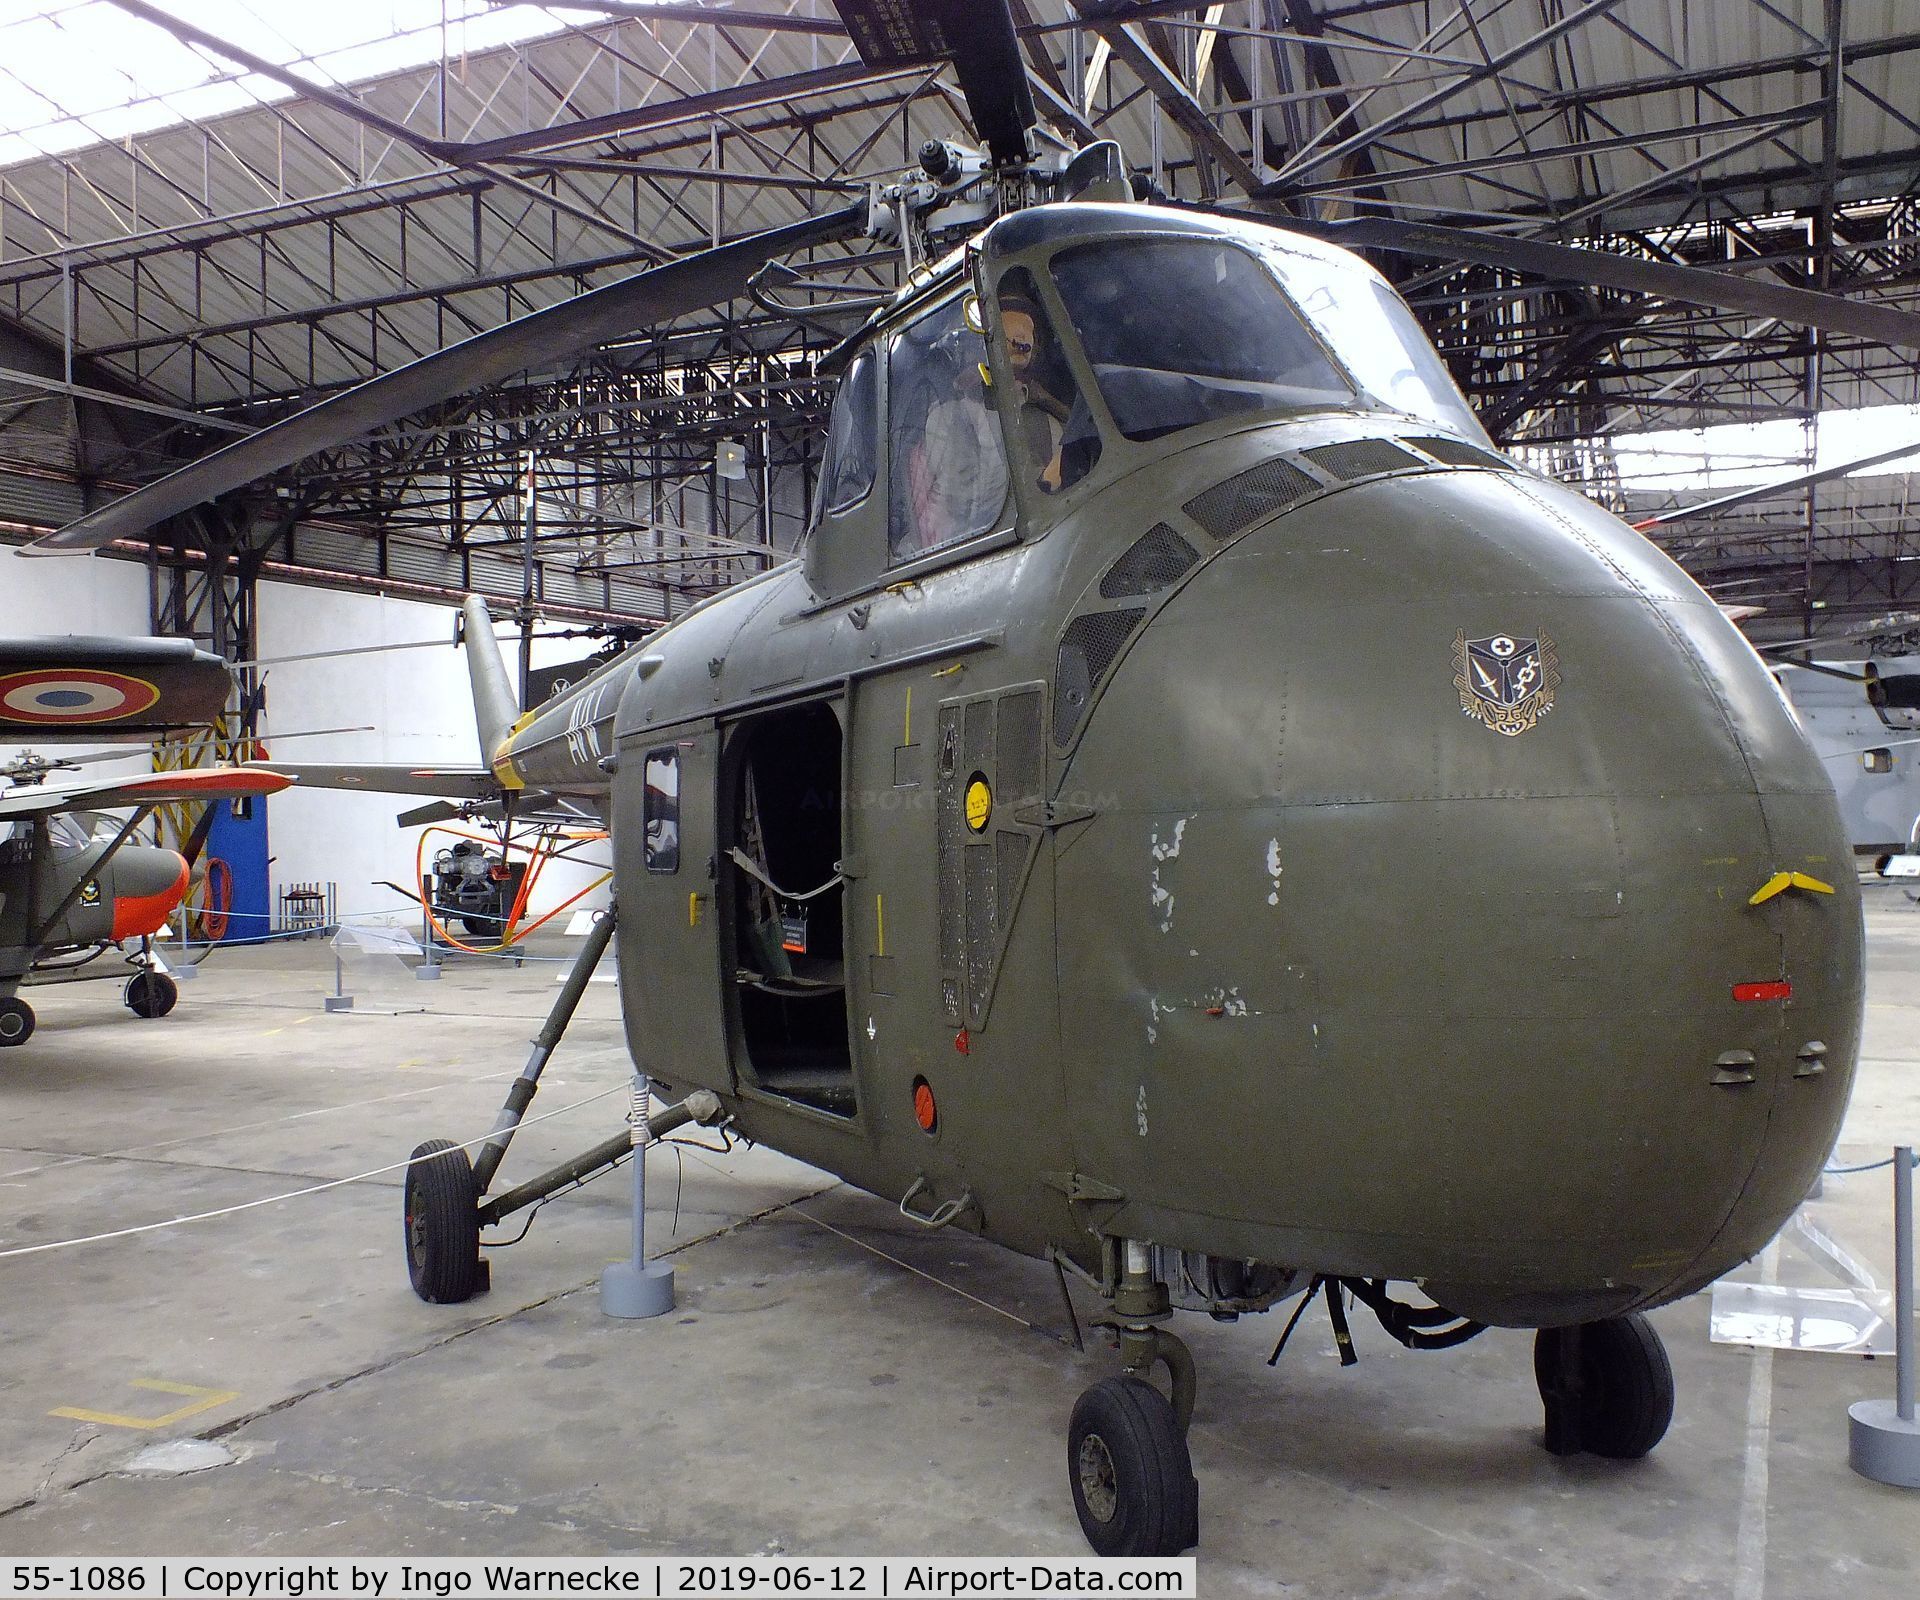 55-1086, Sikorsky H-19D Chickasaw C/N 55-1086, Sikorsky H-19D Chickasaw at the Musee de l'ALAT et de l'Helicoptere, Dax